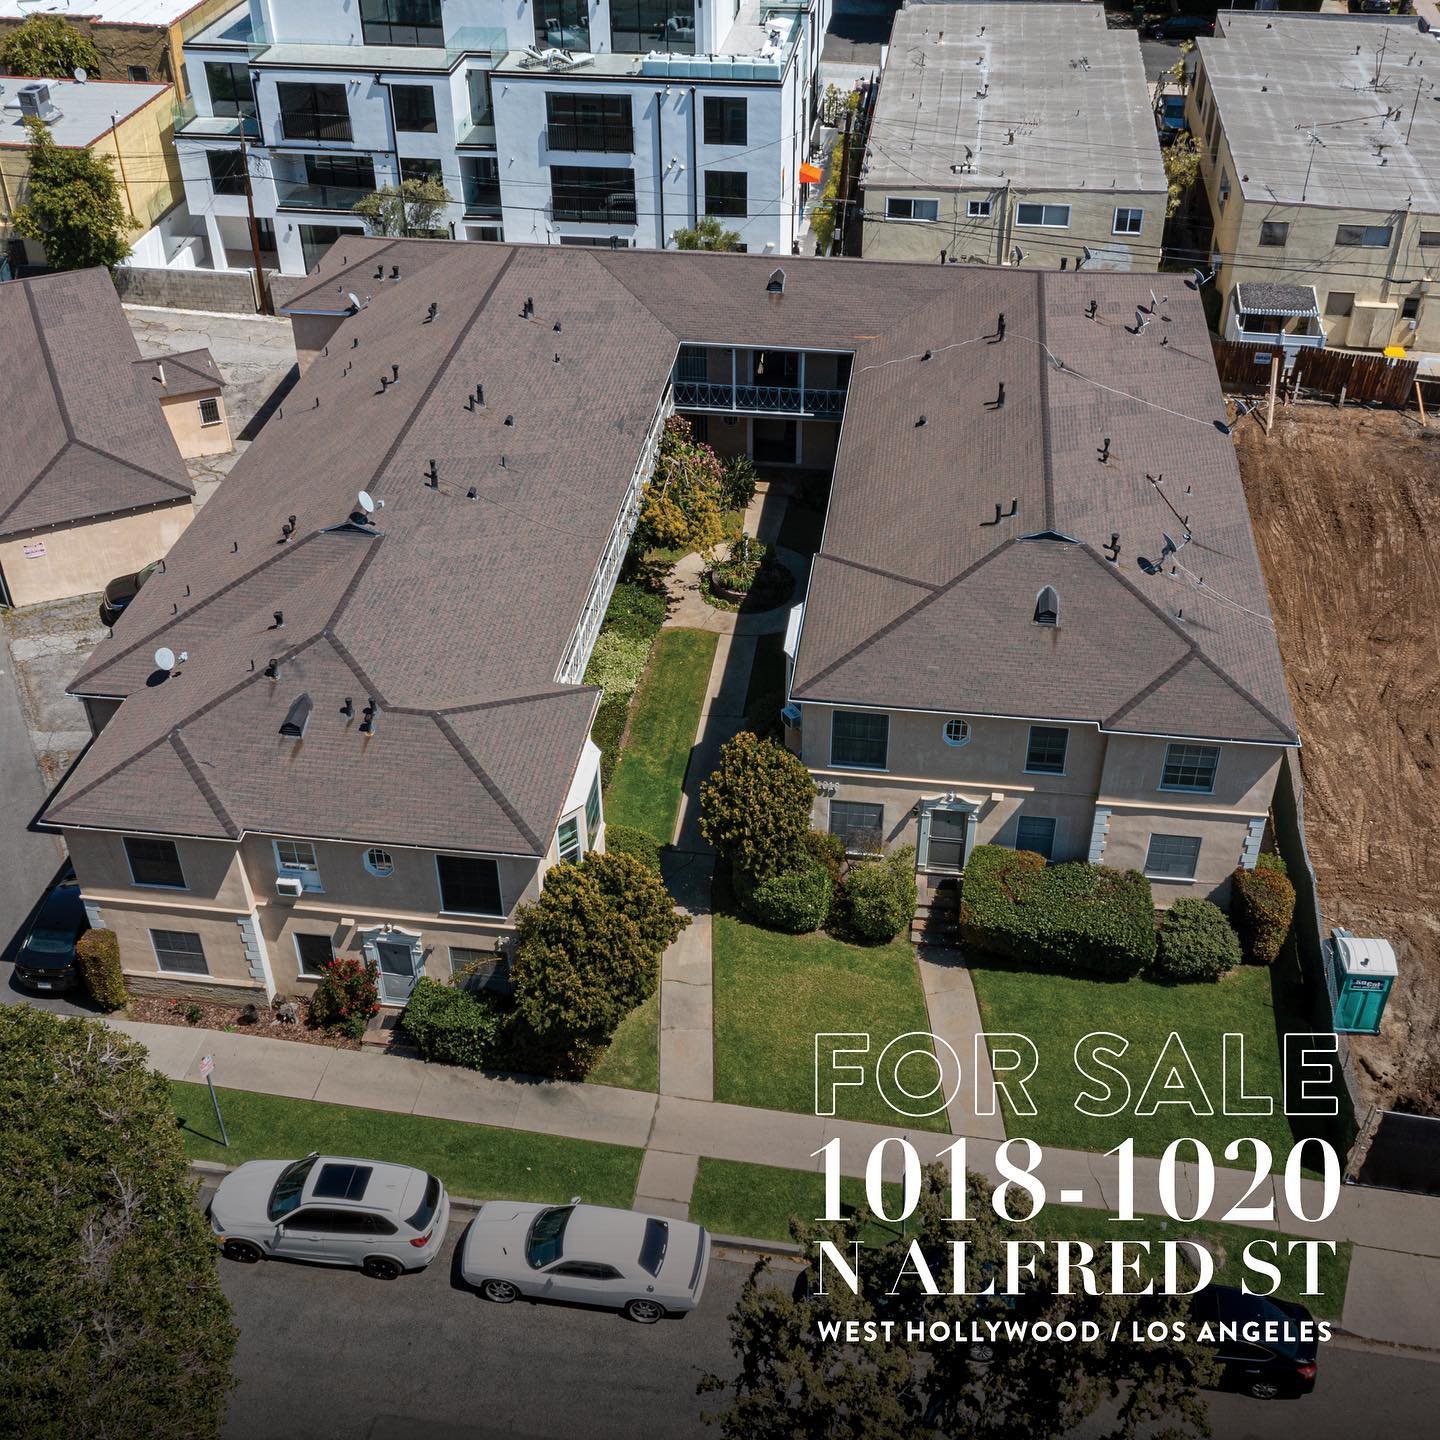 NEW TO MARKET For Sale: 18 unit multi-family opportunity | A++ irreplaceable&nbsp;location north of Melrose Ave &amp;&nbsp;South of Santa Monica Blvd
📍 1018-1020 N Alfred St, West Hollywood / Los Angeles&nbsp; |&nbsp; Building Size: 14,480 SF
&nbsp;